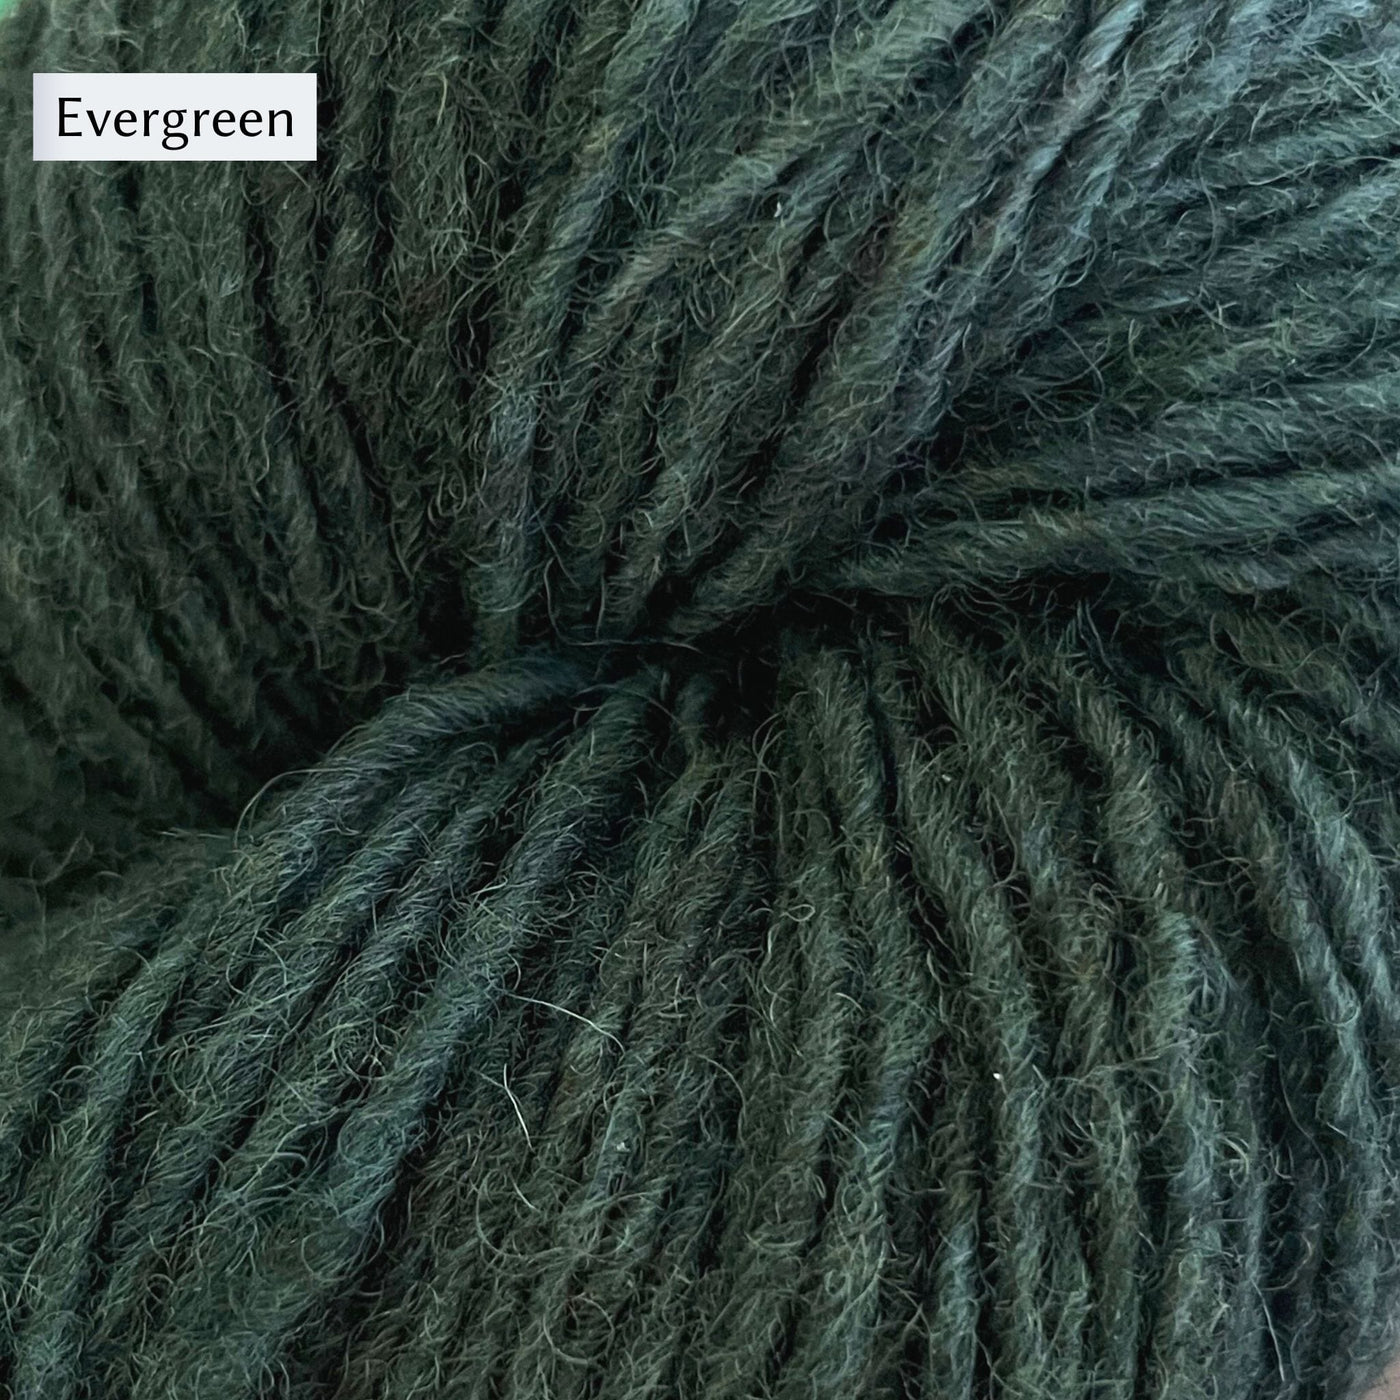 Lichen & Lace Rustic Heather Sport, a sport weight single-ply yarn, in Evergreen, a cool green